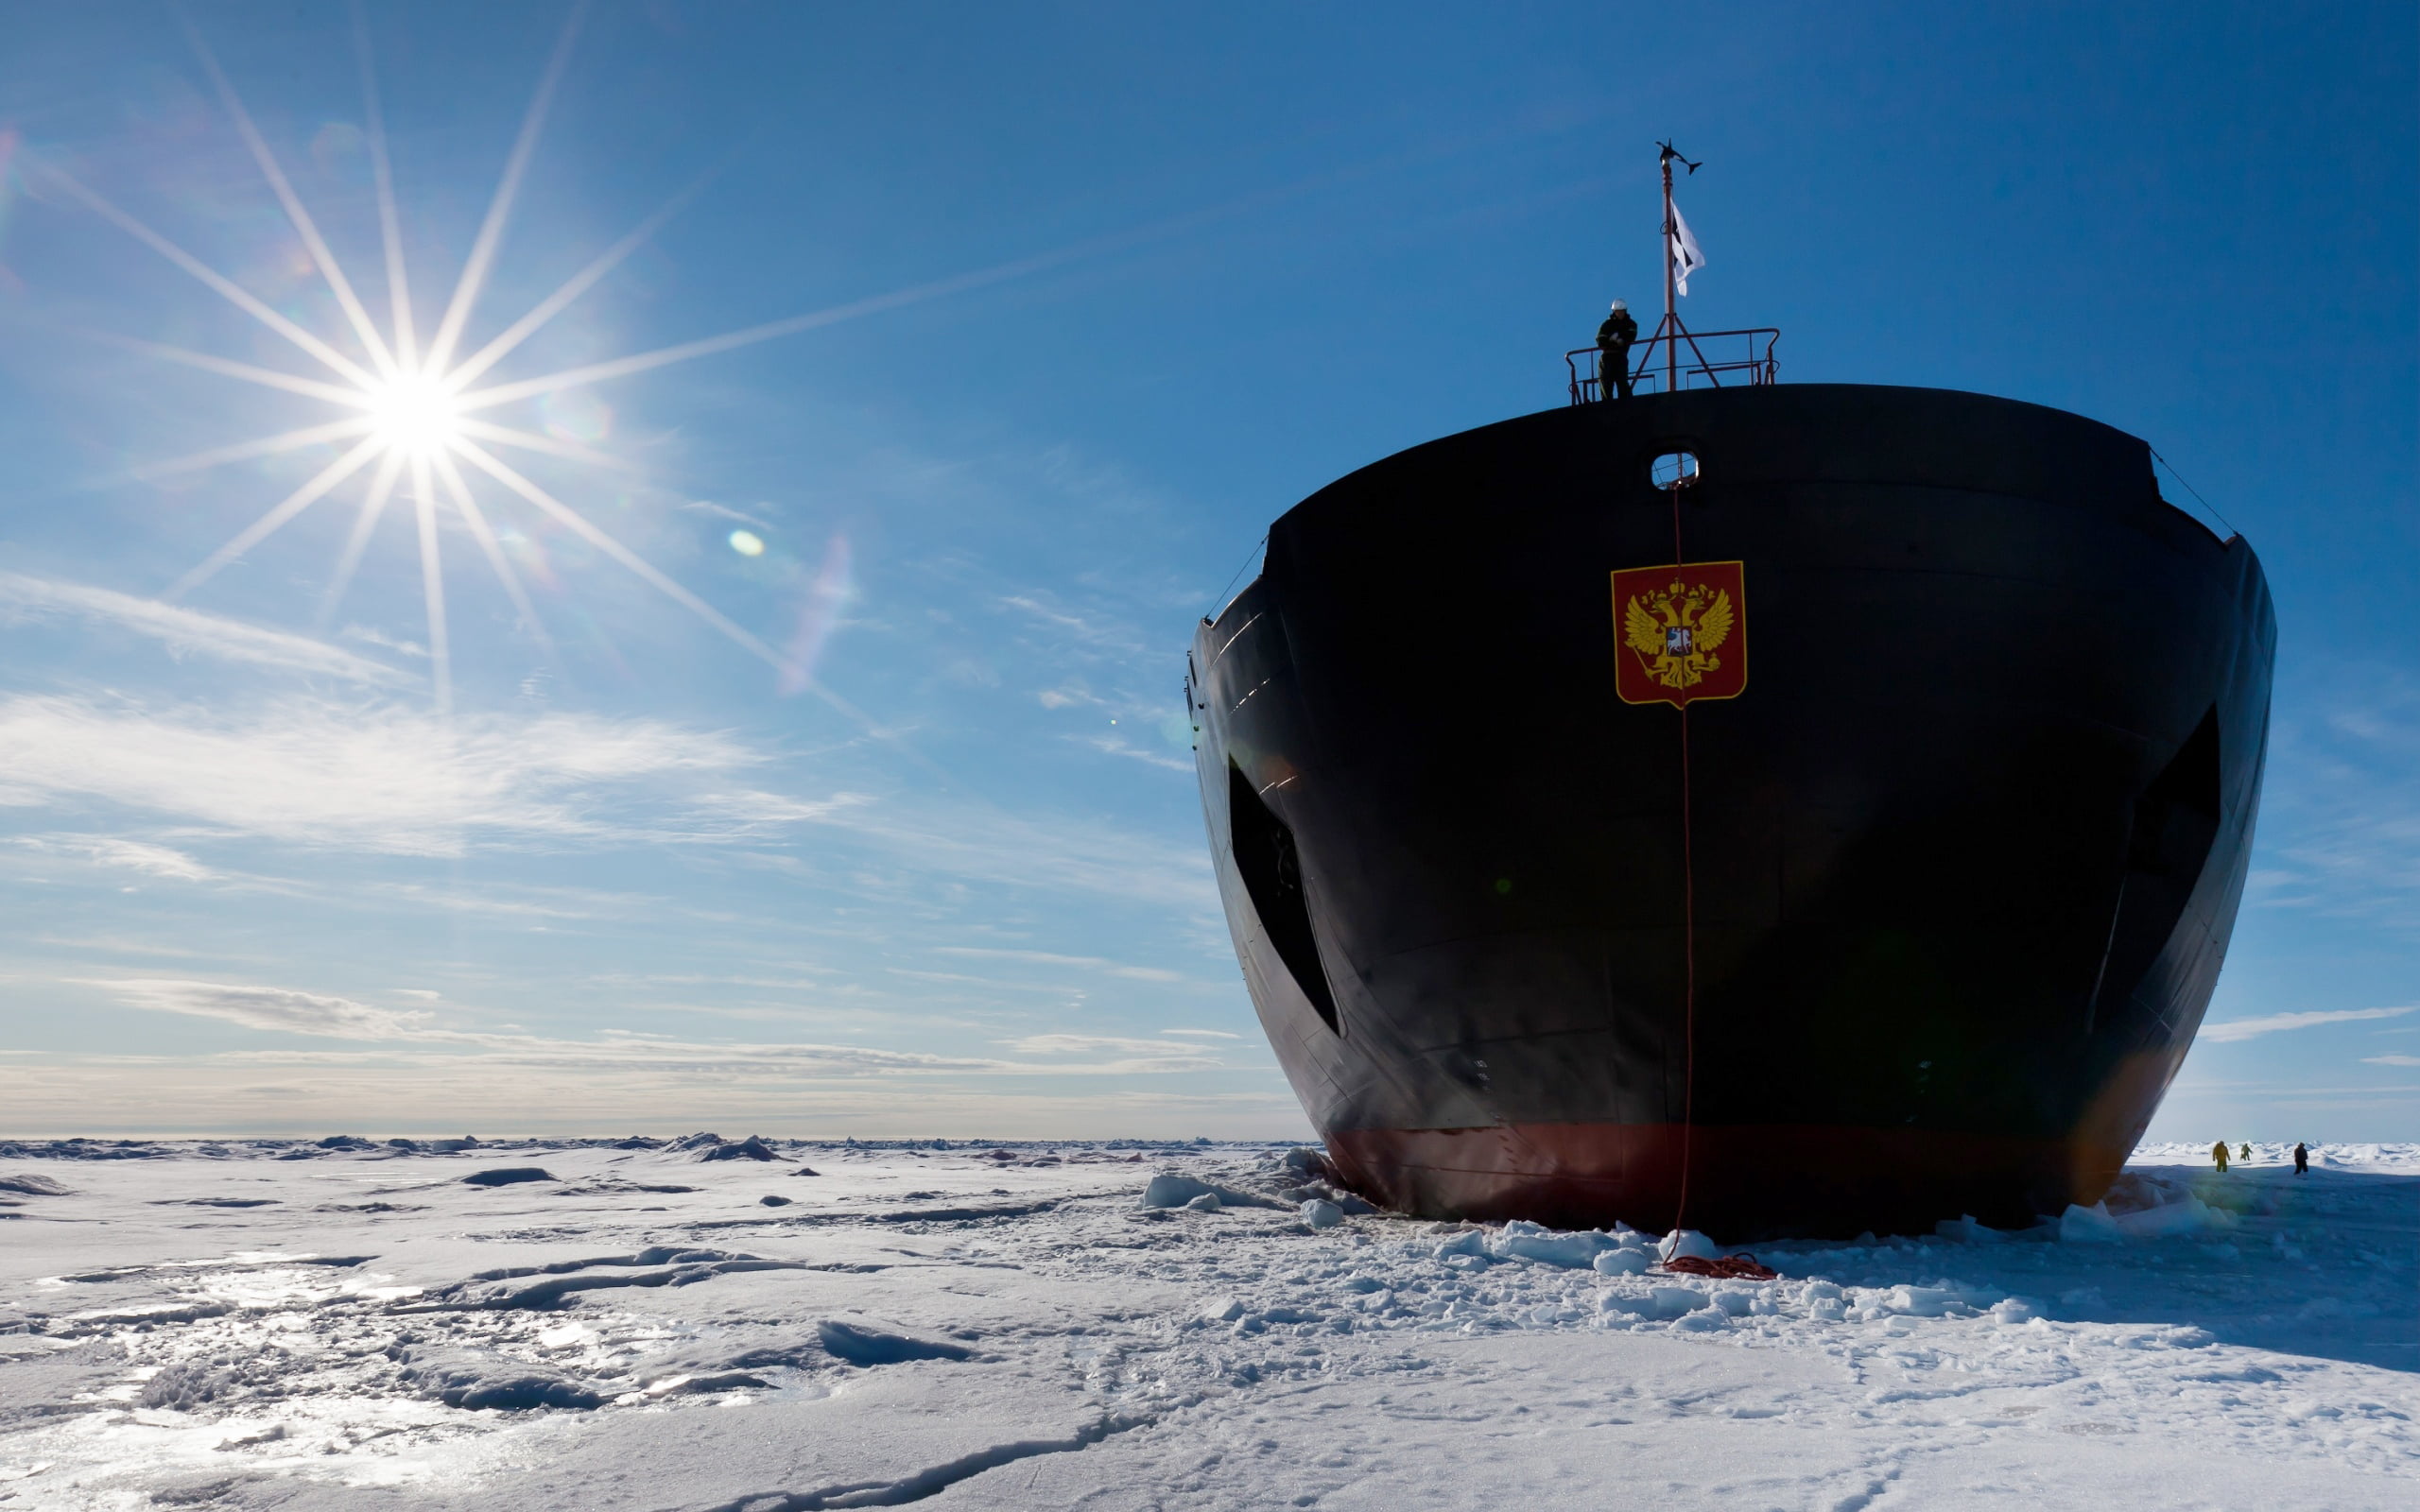 black and red cargo ship, The sun, The sky, Sea, Ice, Day, Icebreaker